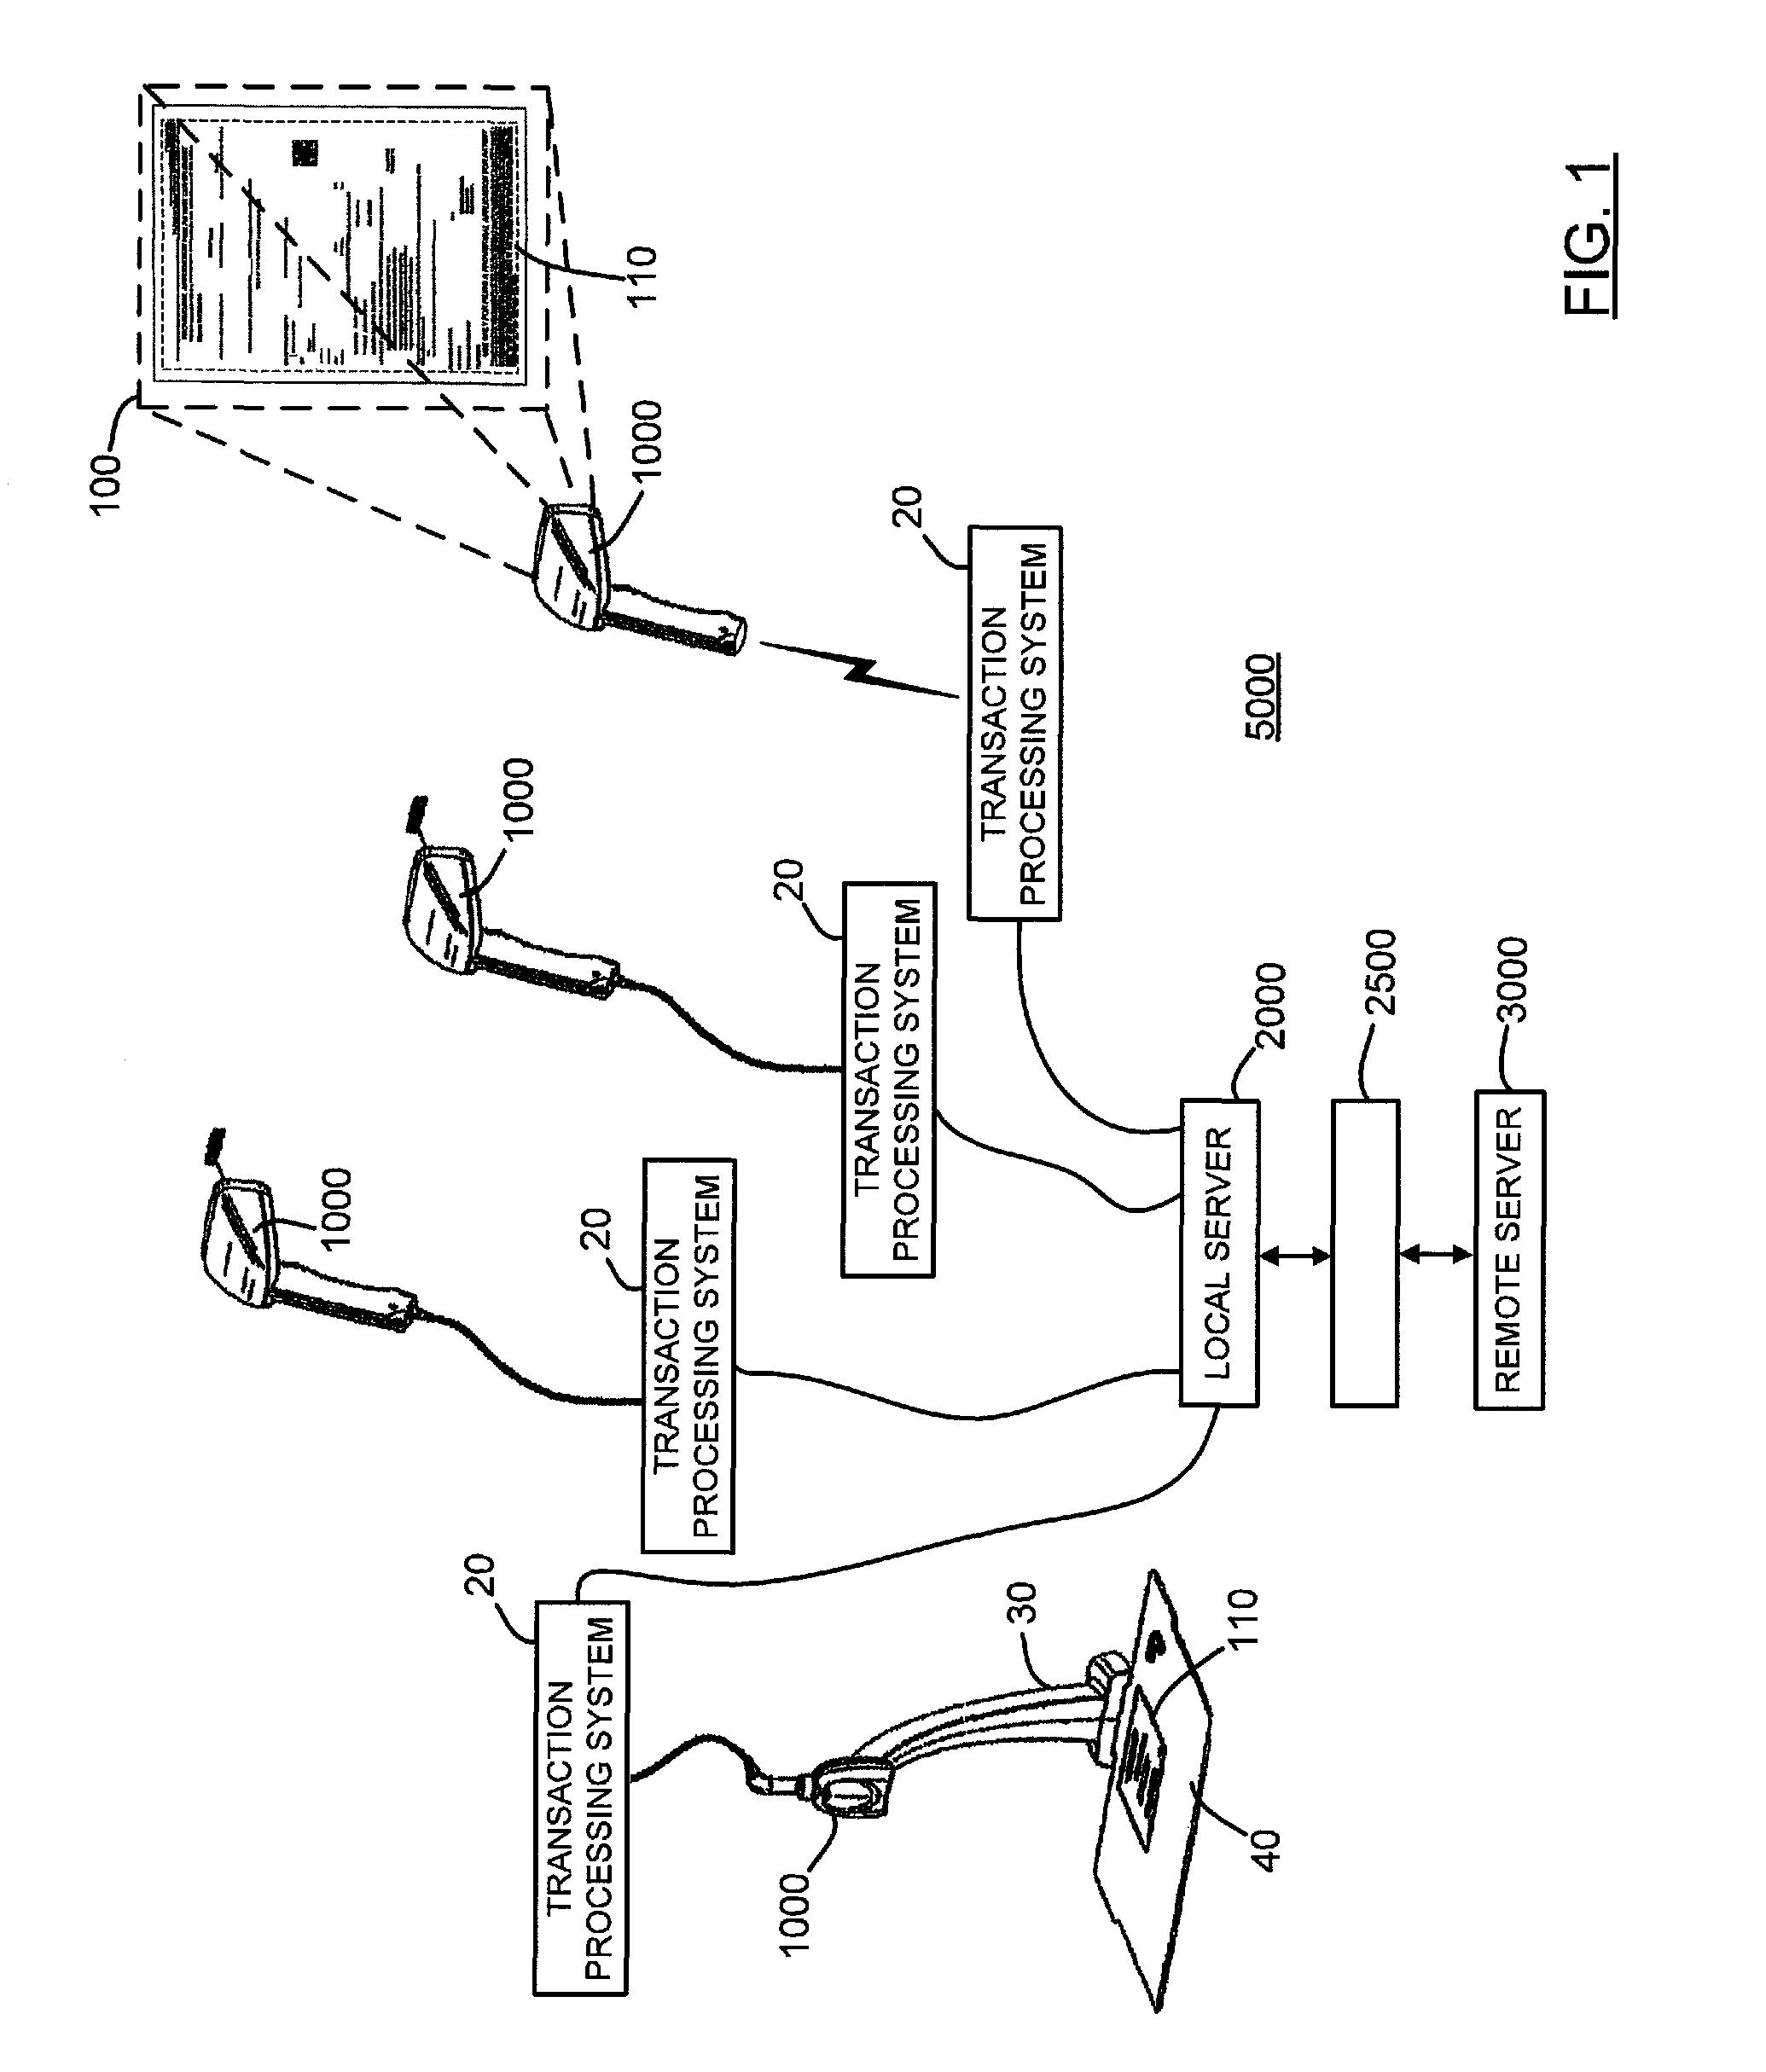 Imaging terminal, imaging sensor to determine document orientation based on bar code orientation and methods for operating the same